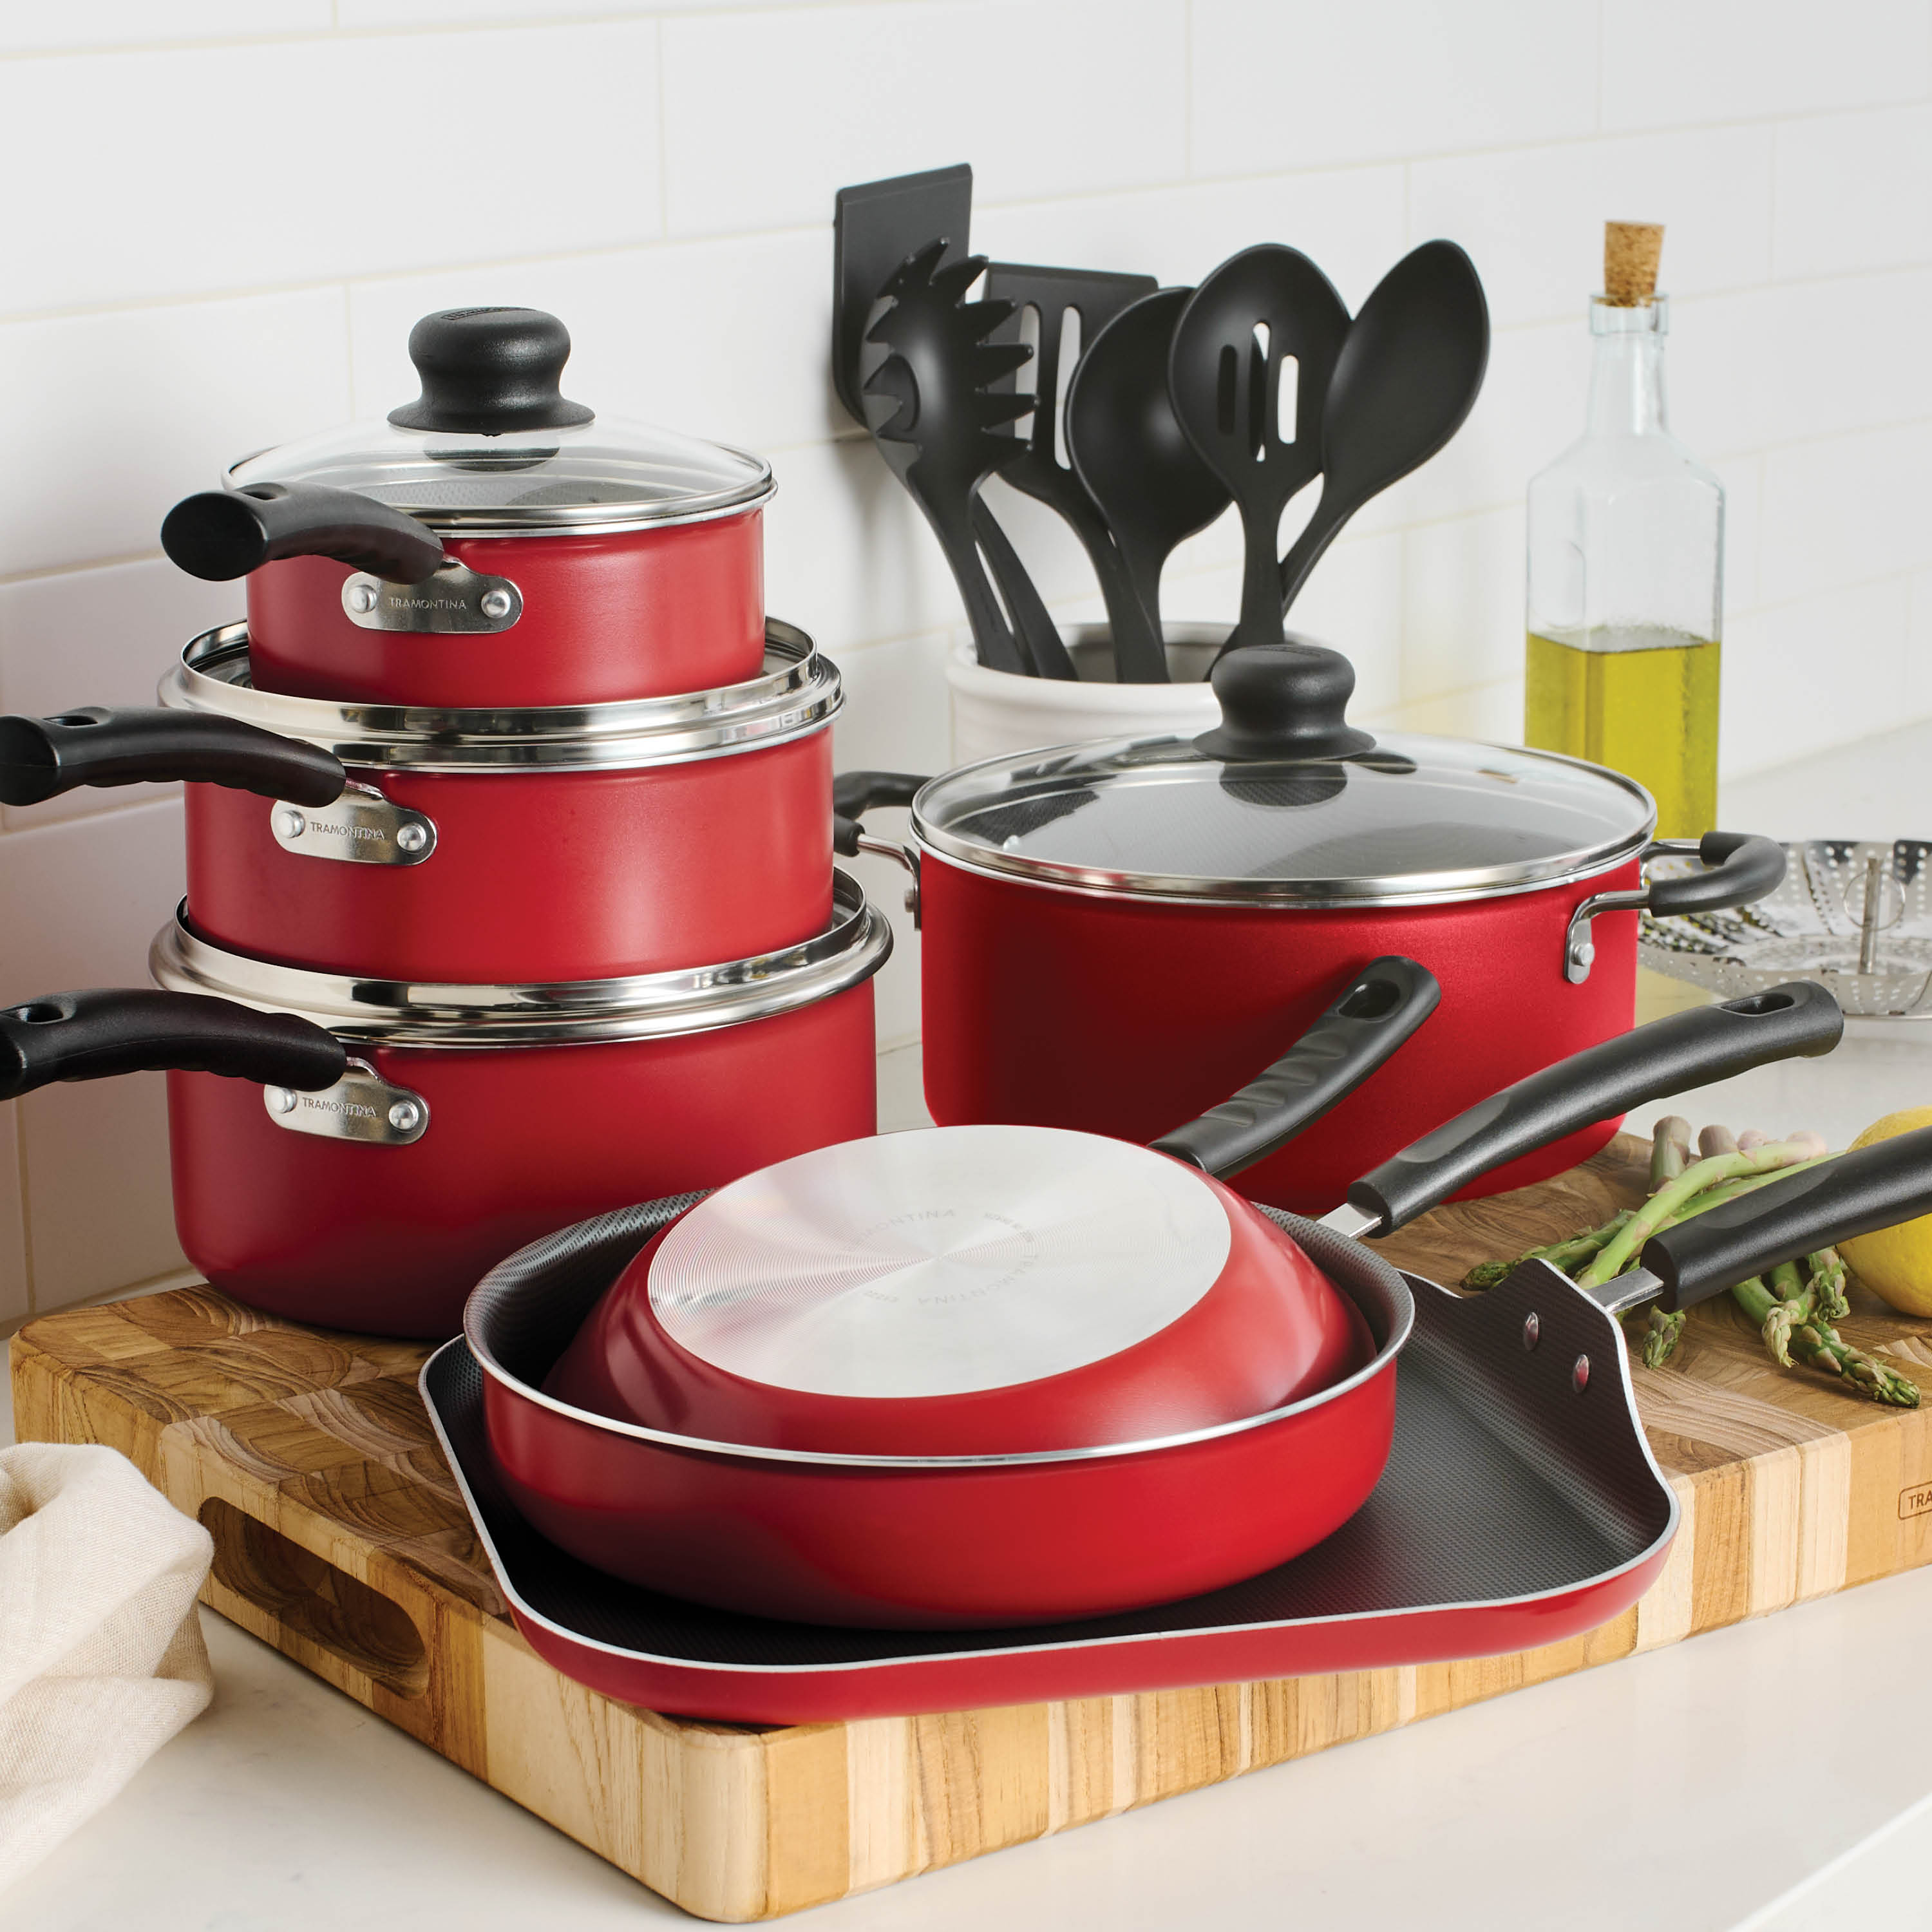 Tramontina Primaware 18 Piece Non-stick Cookware Set, Red - image 5 of 26